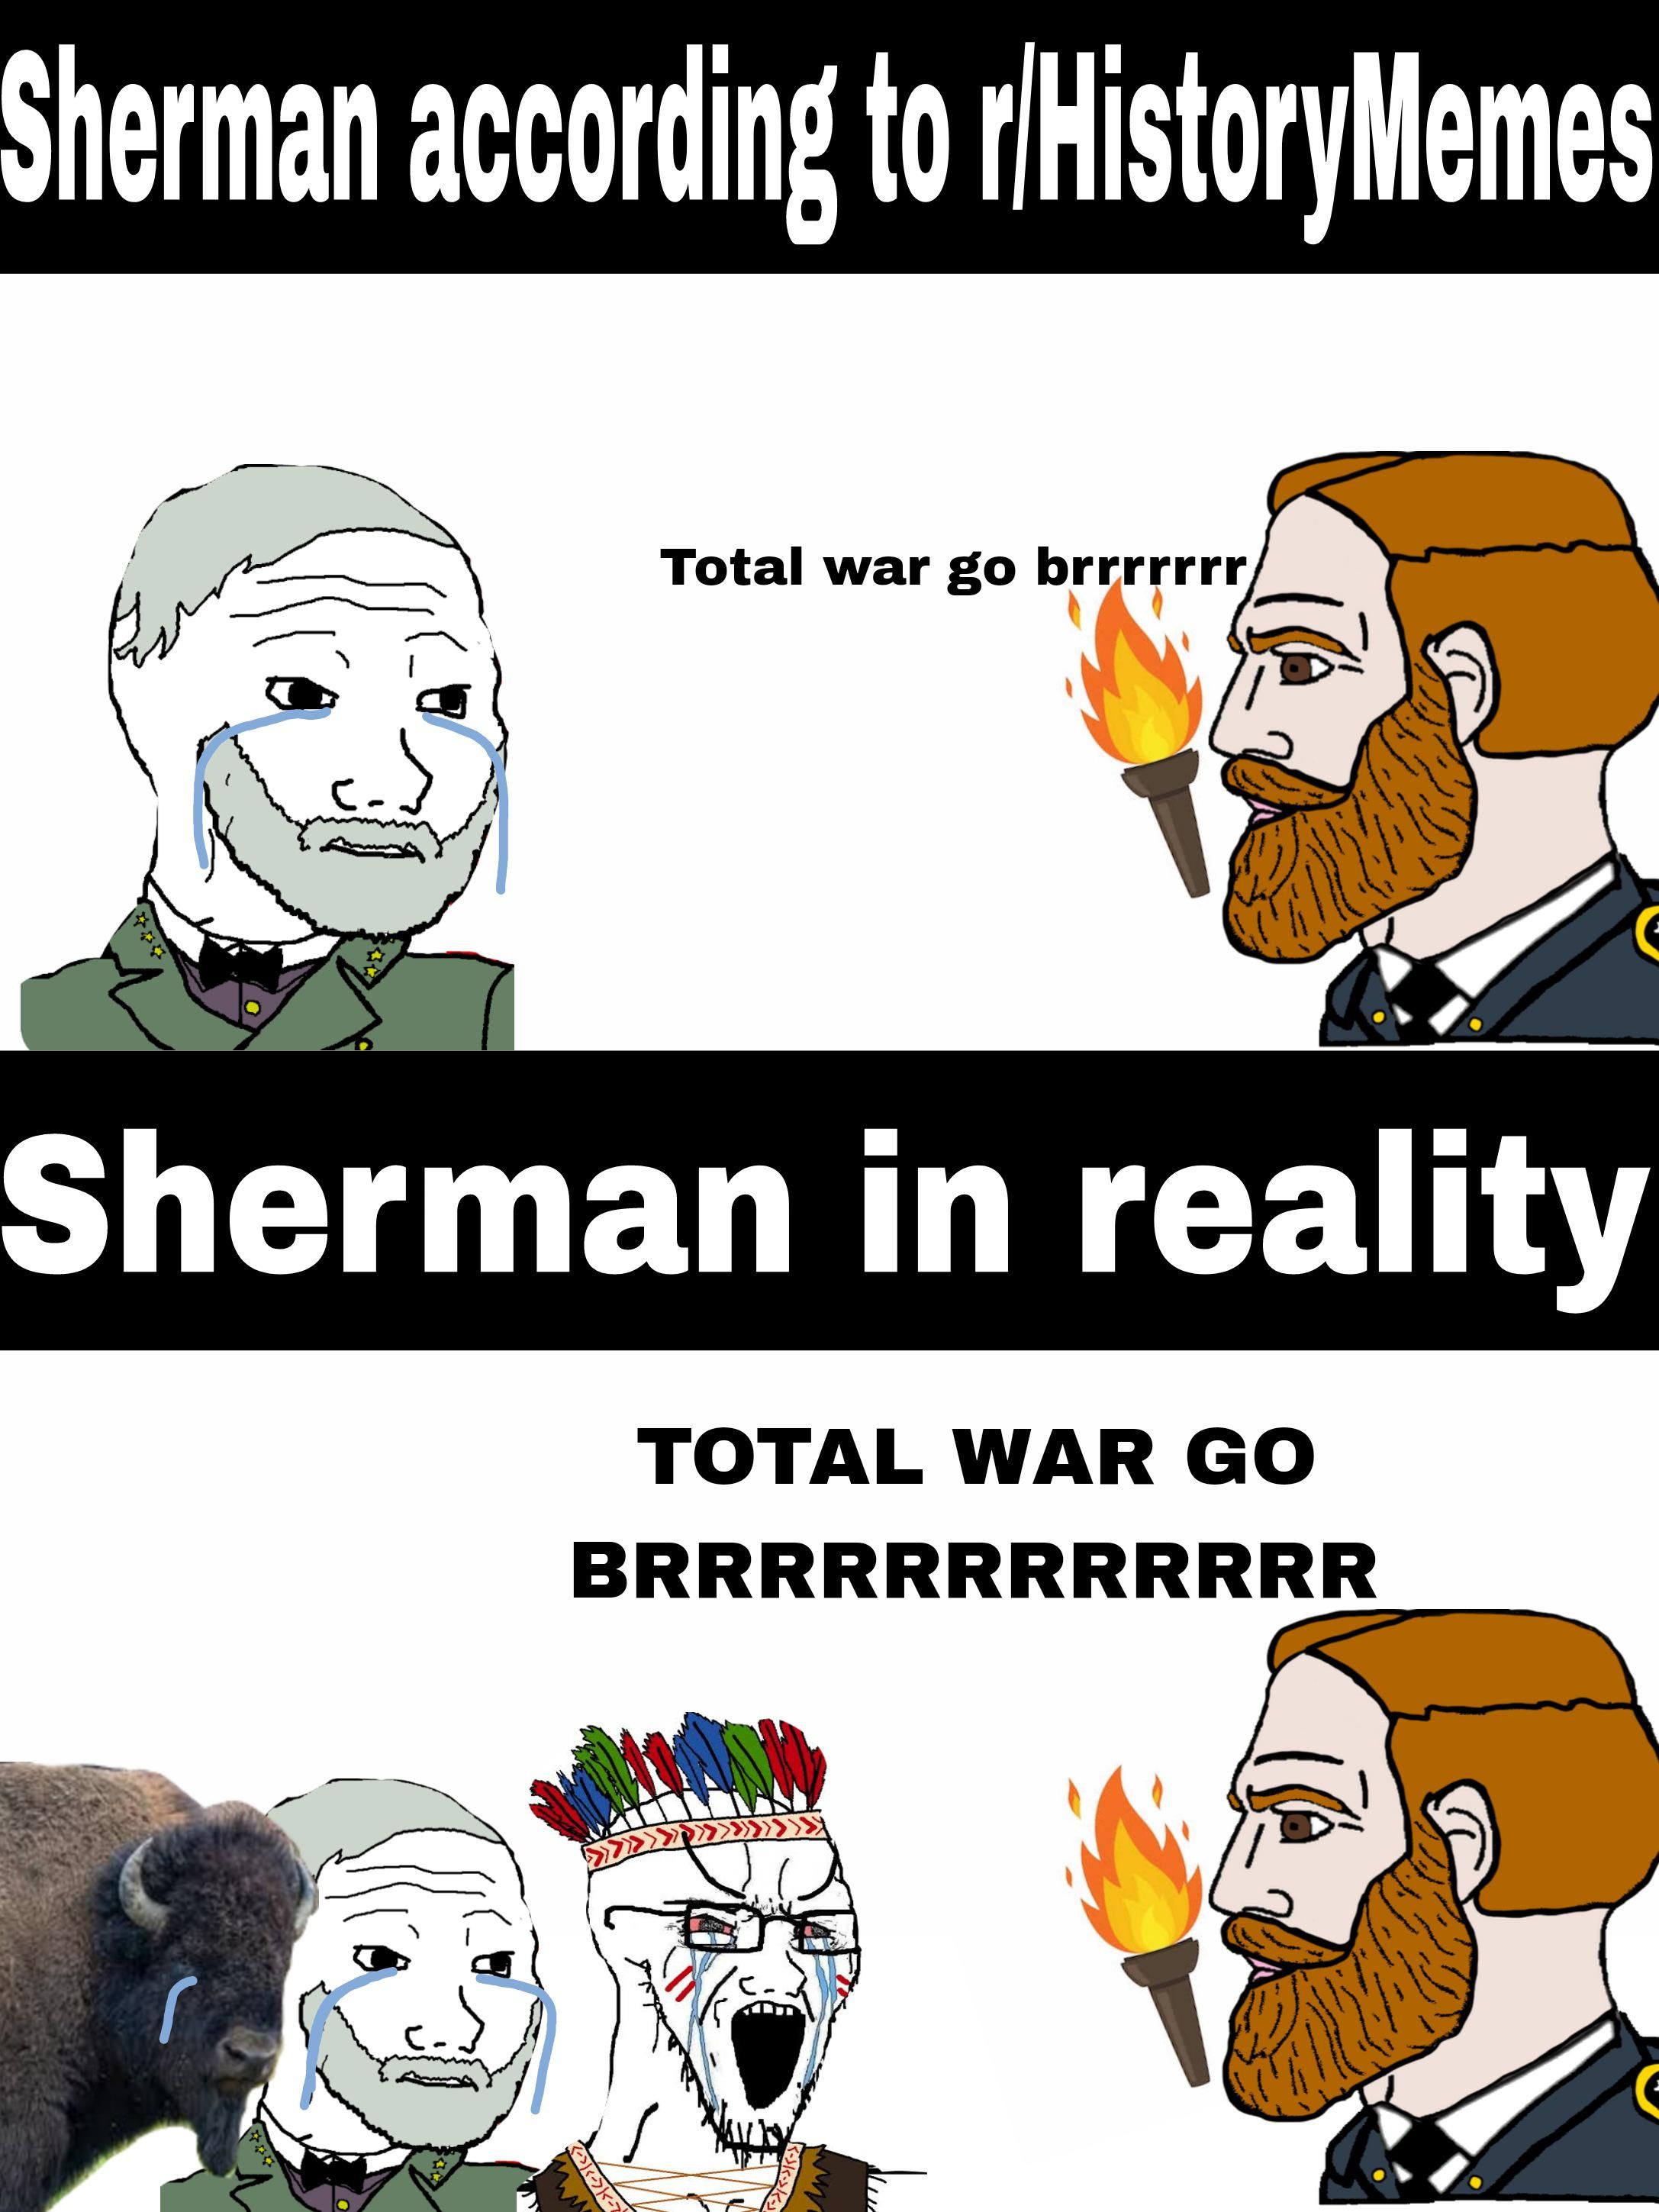 Sherman was brutal...to all his damn enemies without exception